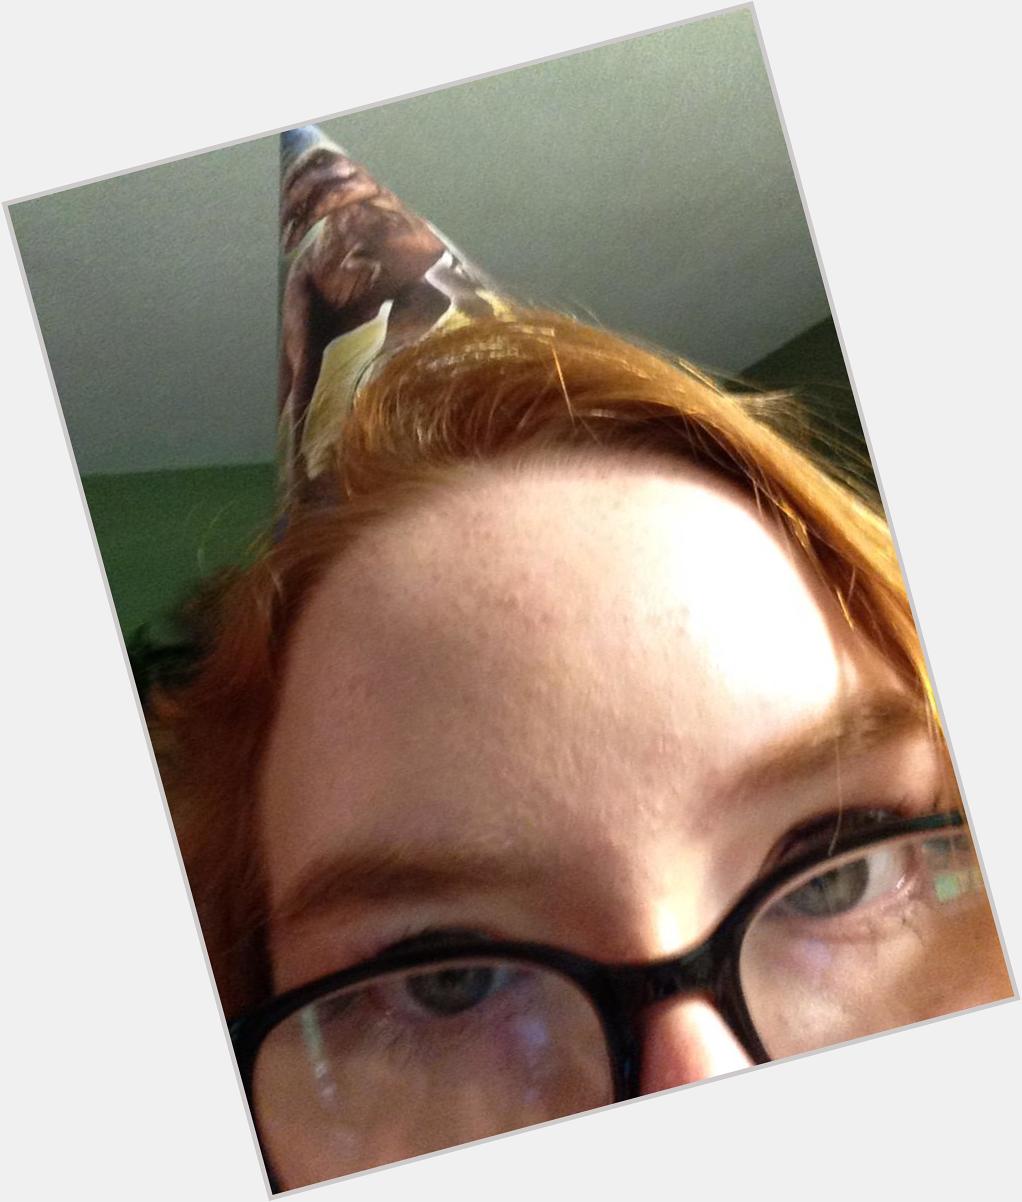  happy birthday heres me wearing a party hat pretend its 4 u 